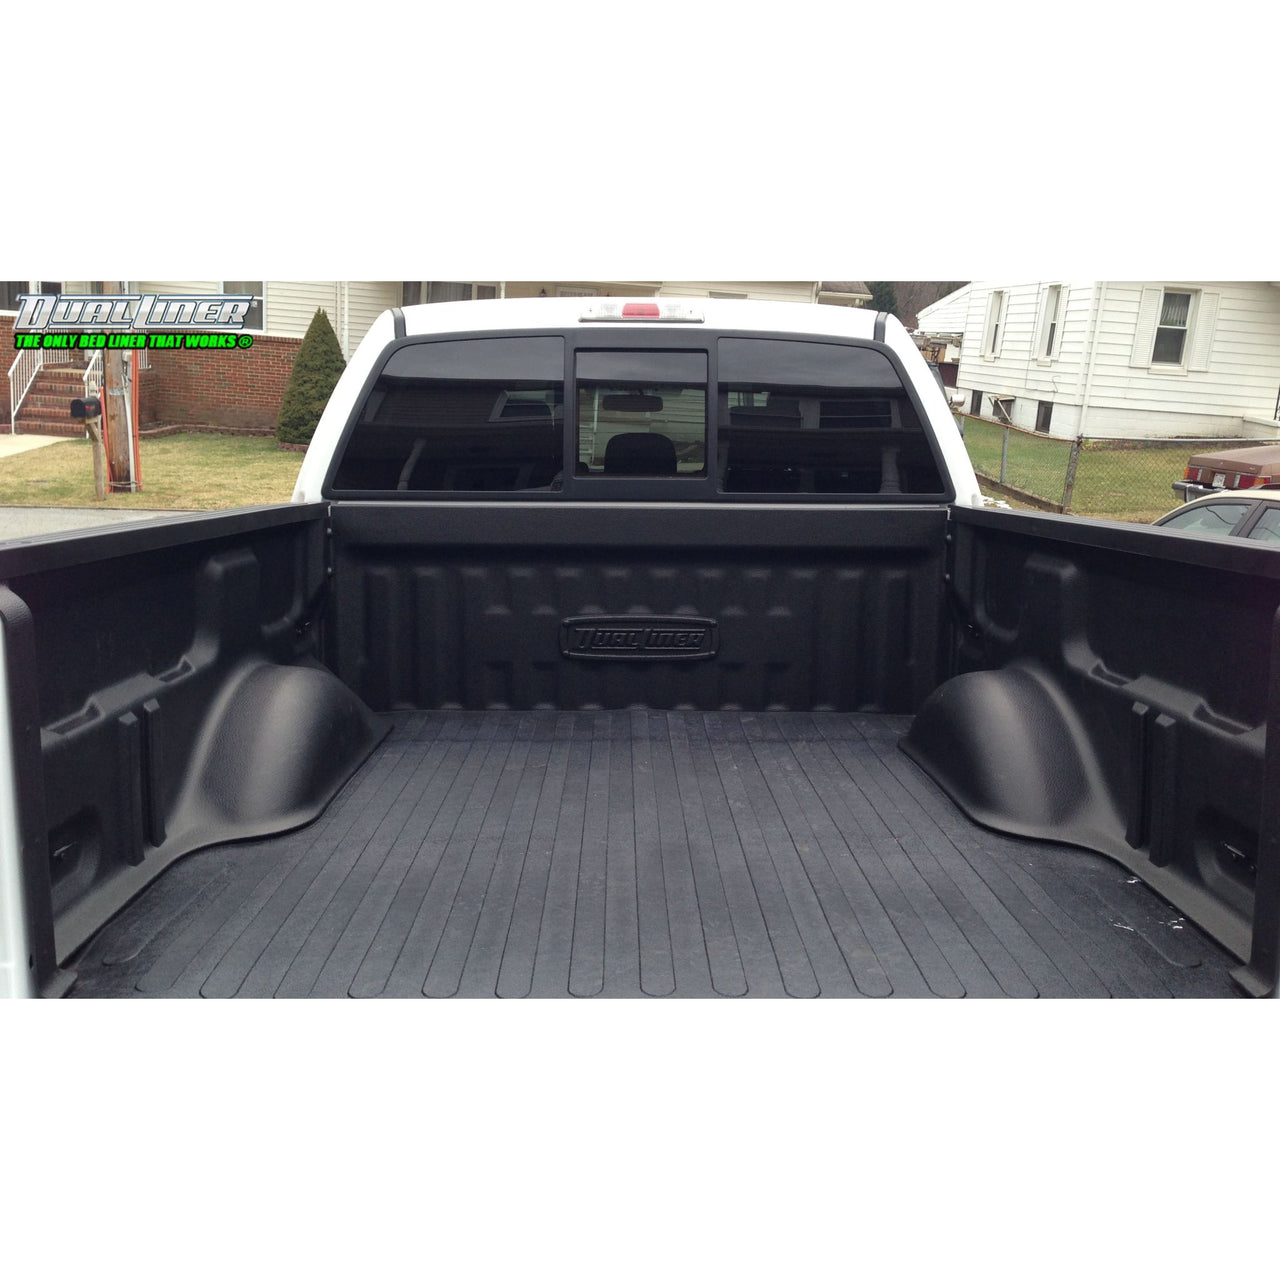 DualLiner 2021 to 2022 F-150 (WITH LED Light Bar) - Short 5.5' Bed